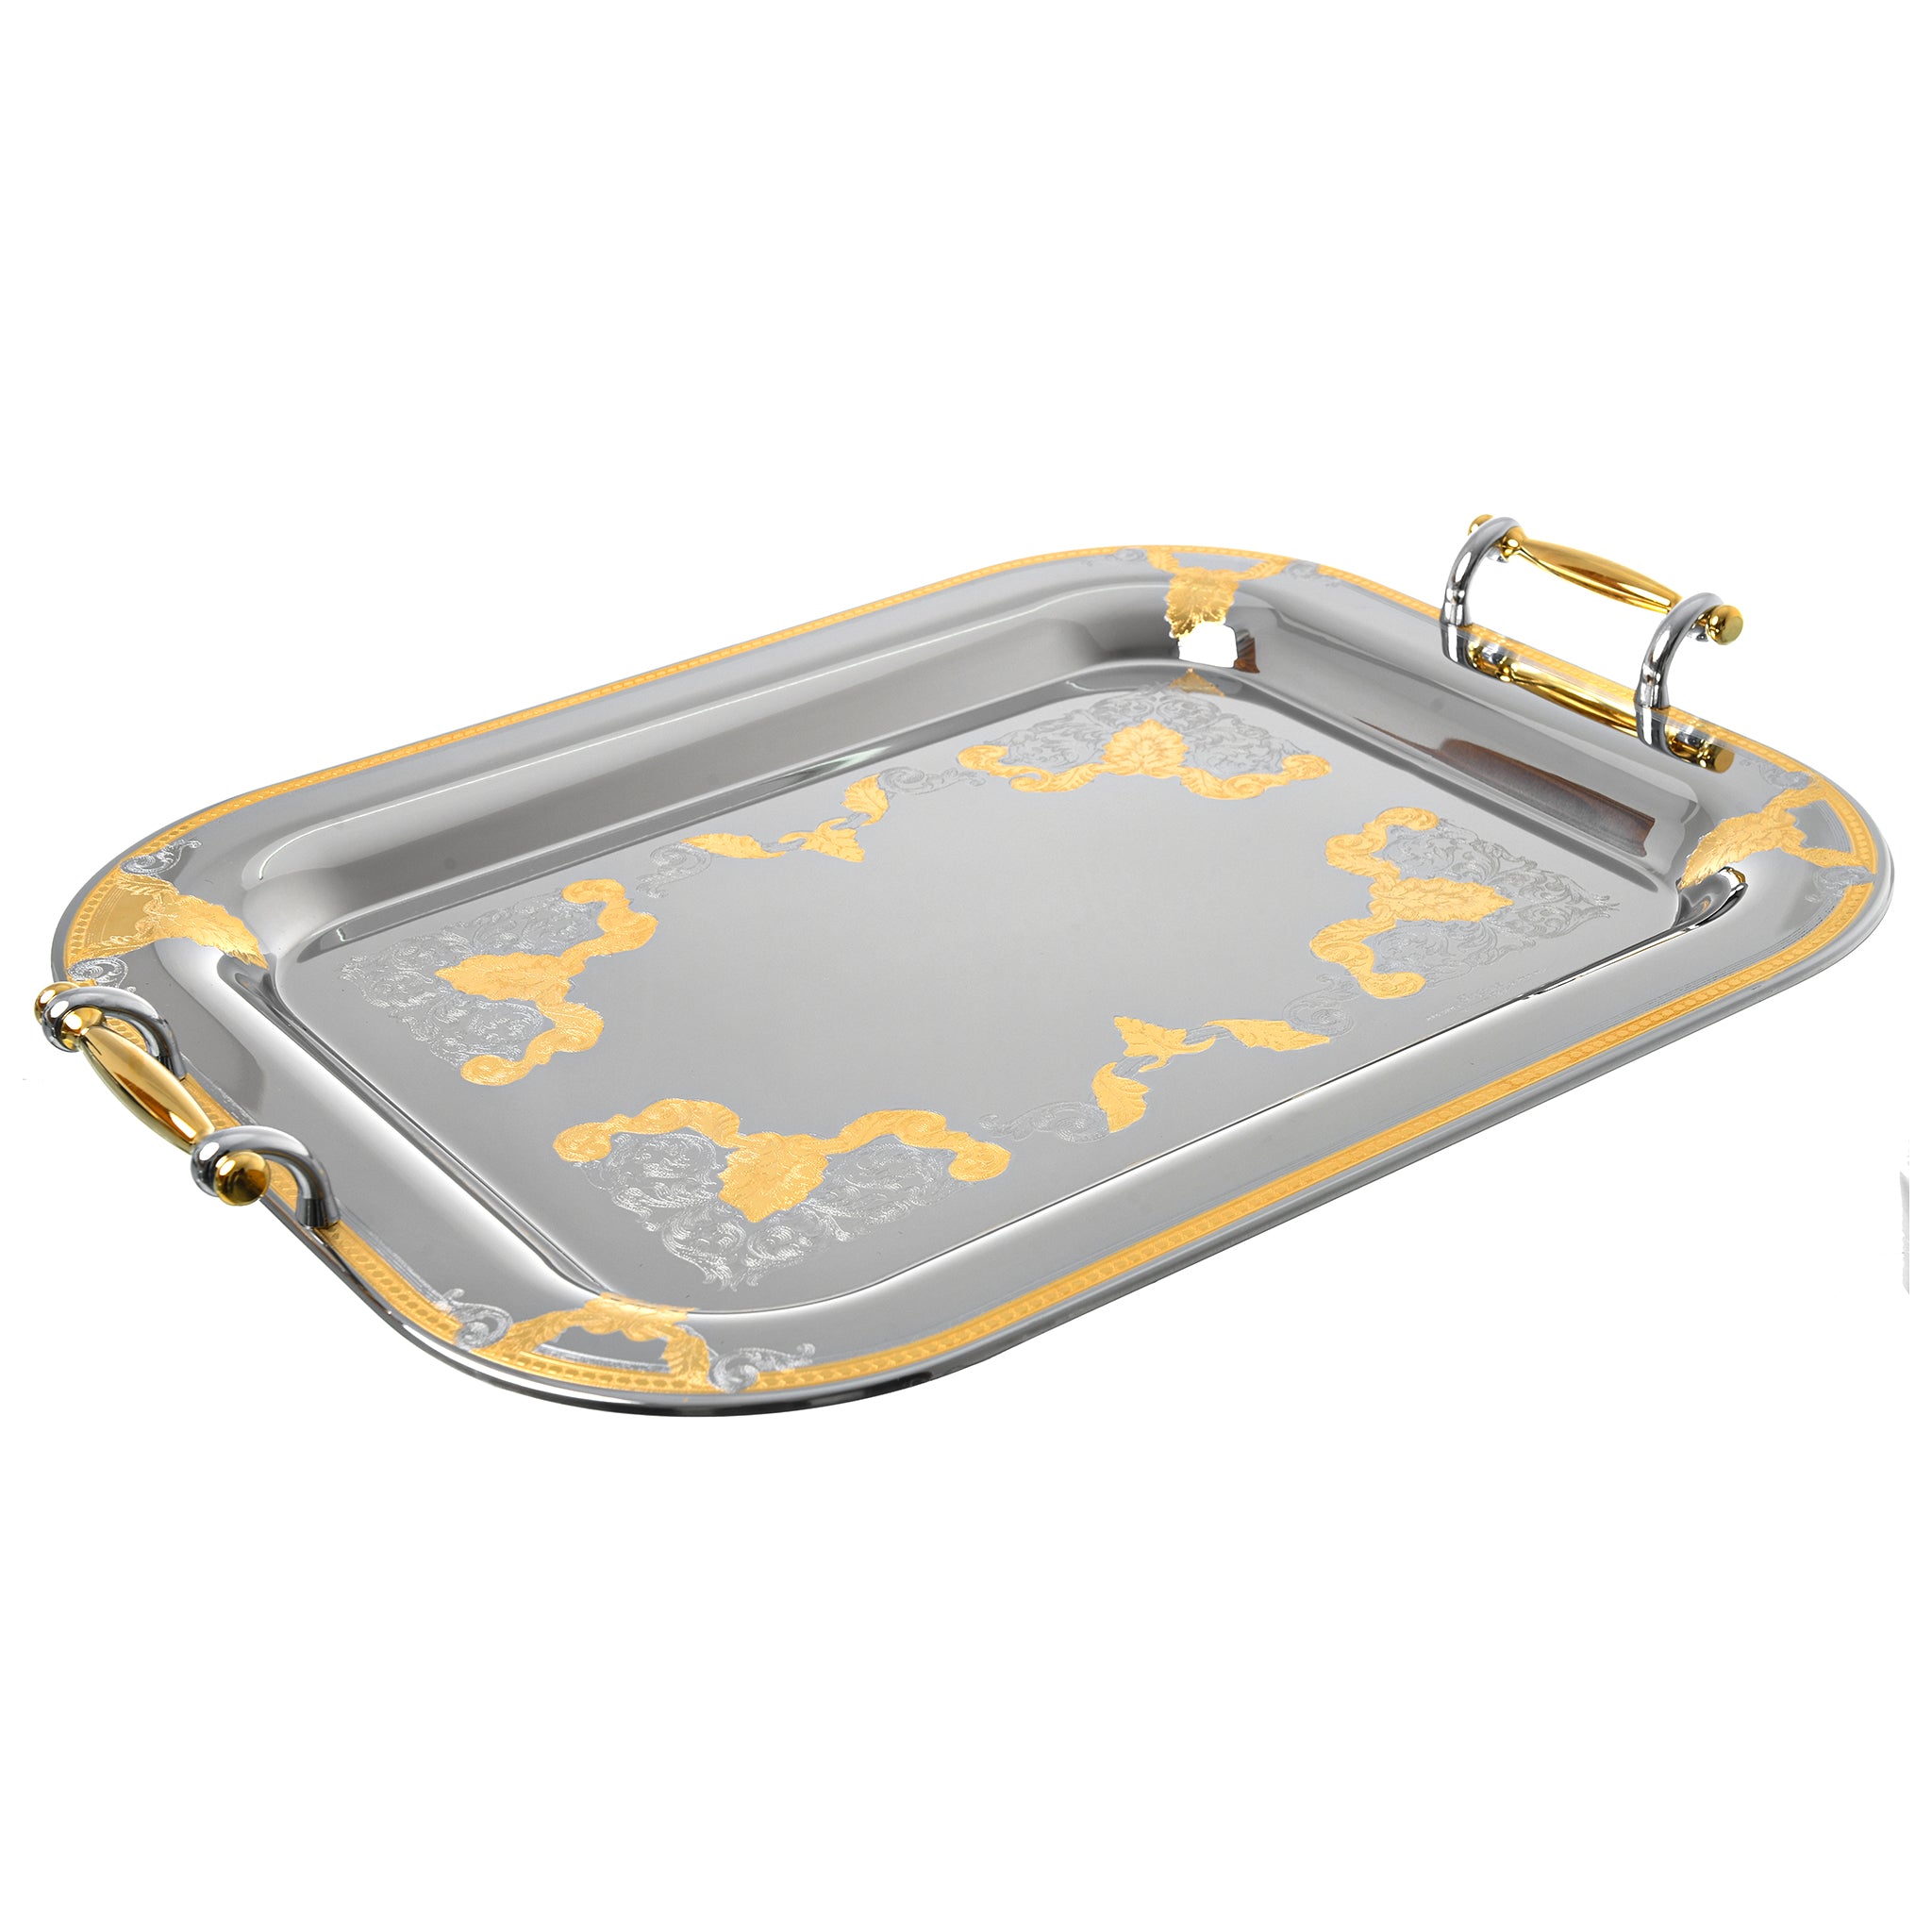 Elegant Gioiel - Rectangular Tray with Handles - Gold - Stainless Steel 18/10 - 55cm - 75000369